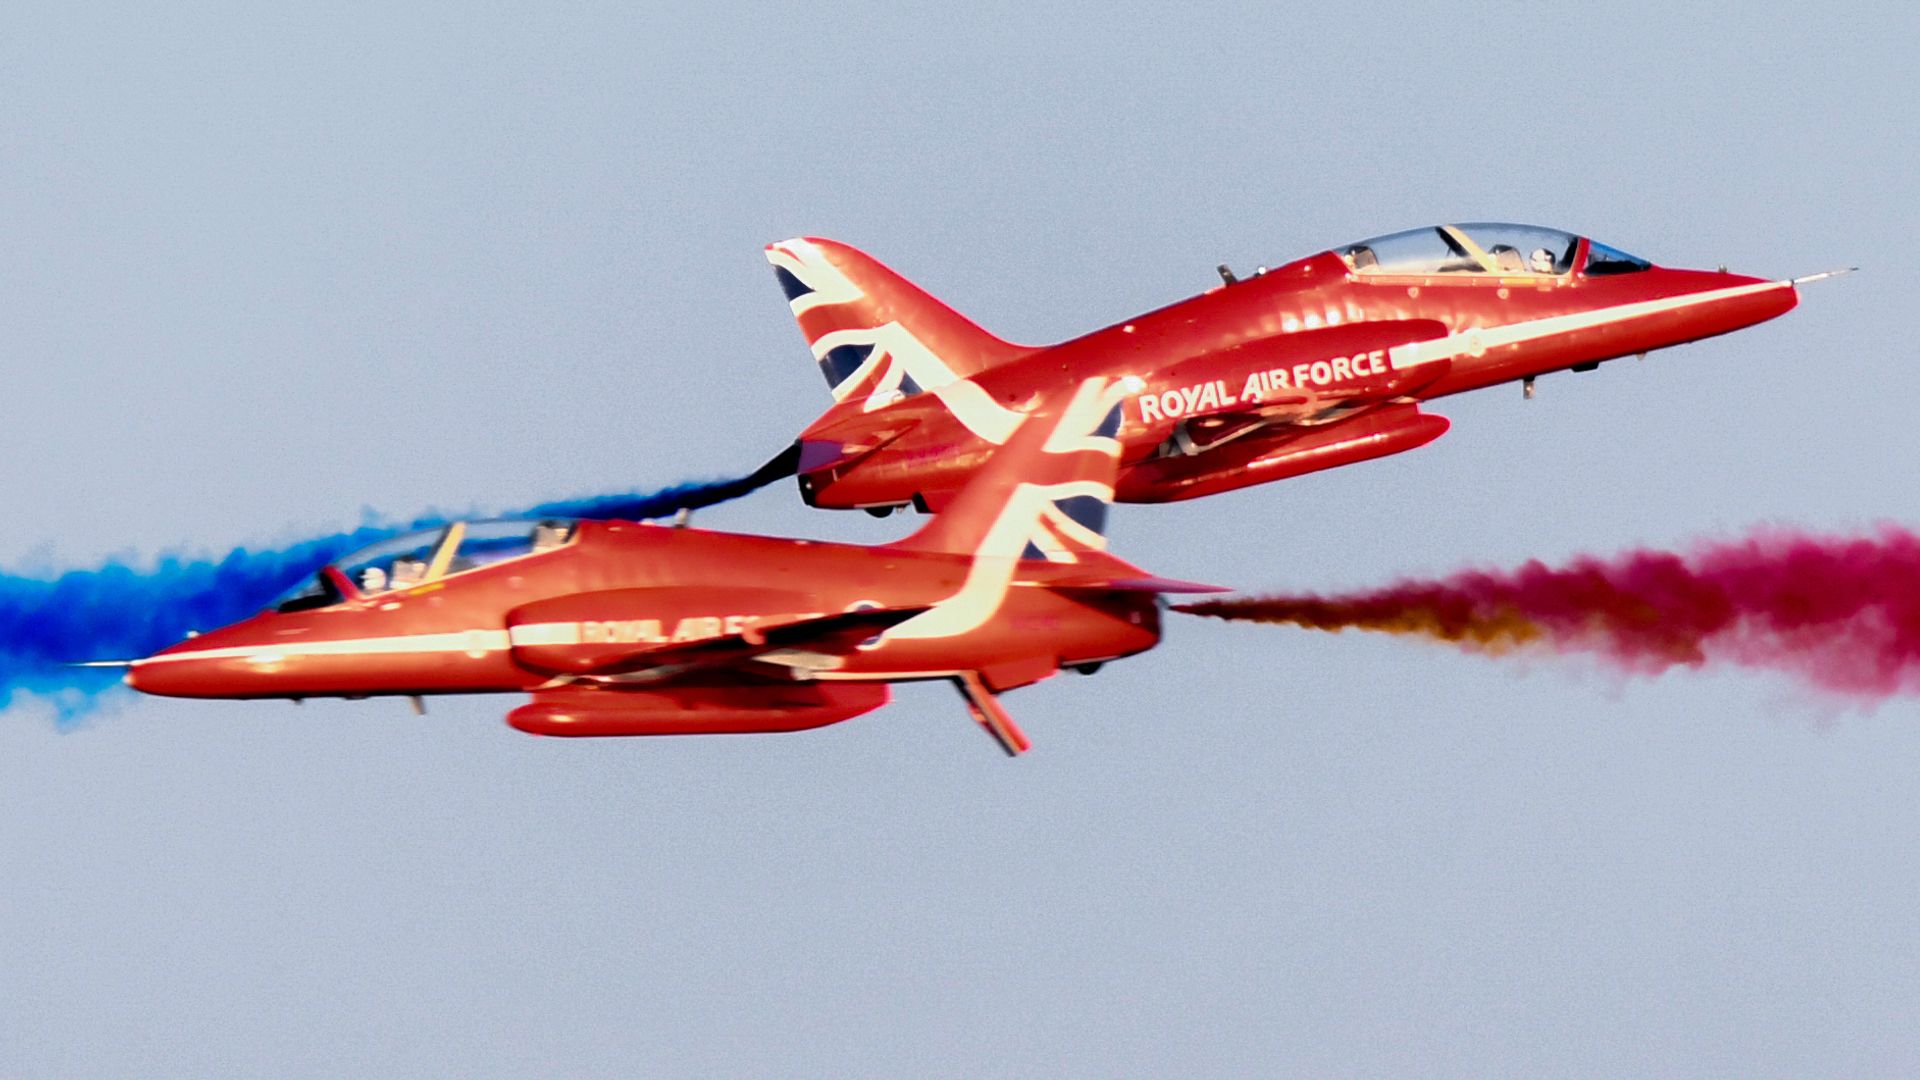 Two Red Arrows aircraft crisscross in the sky